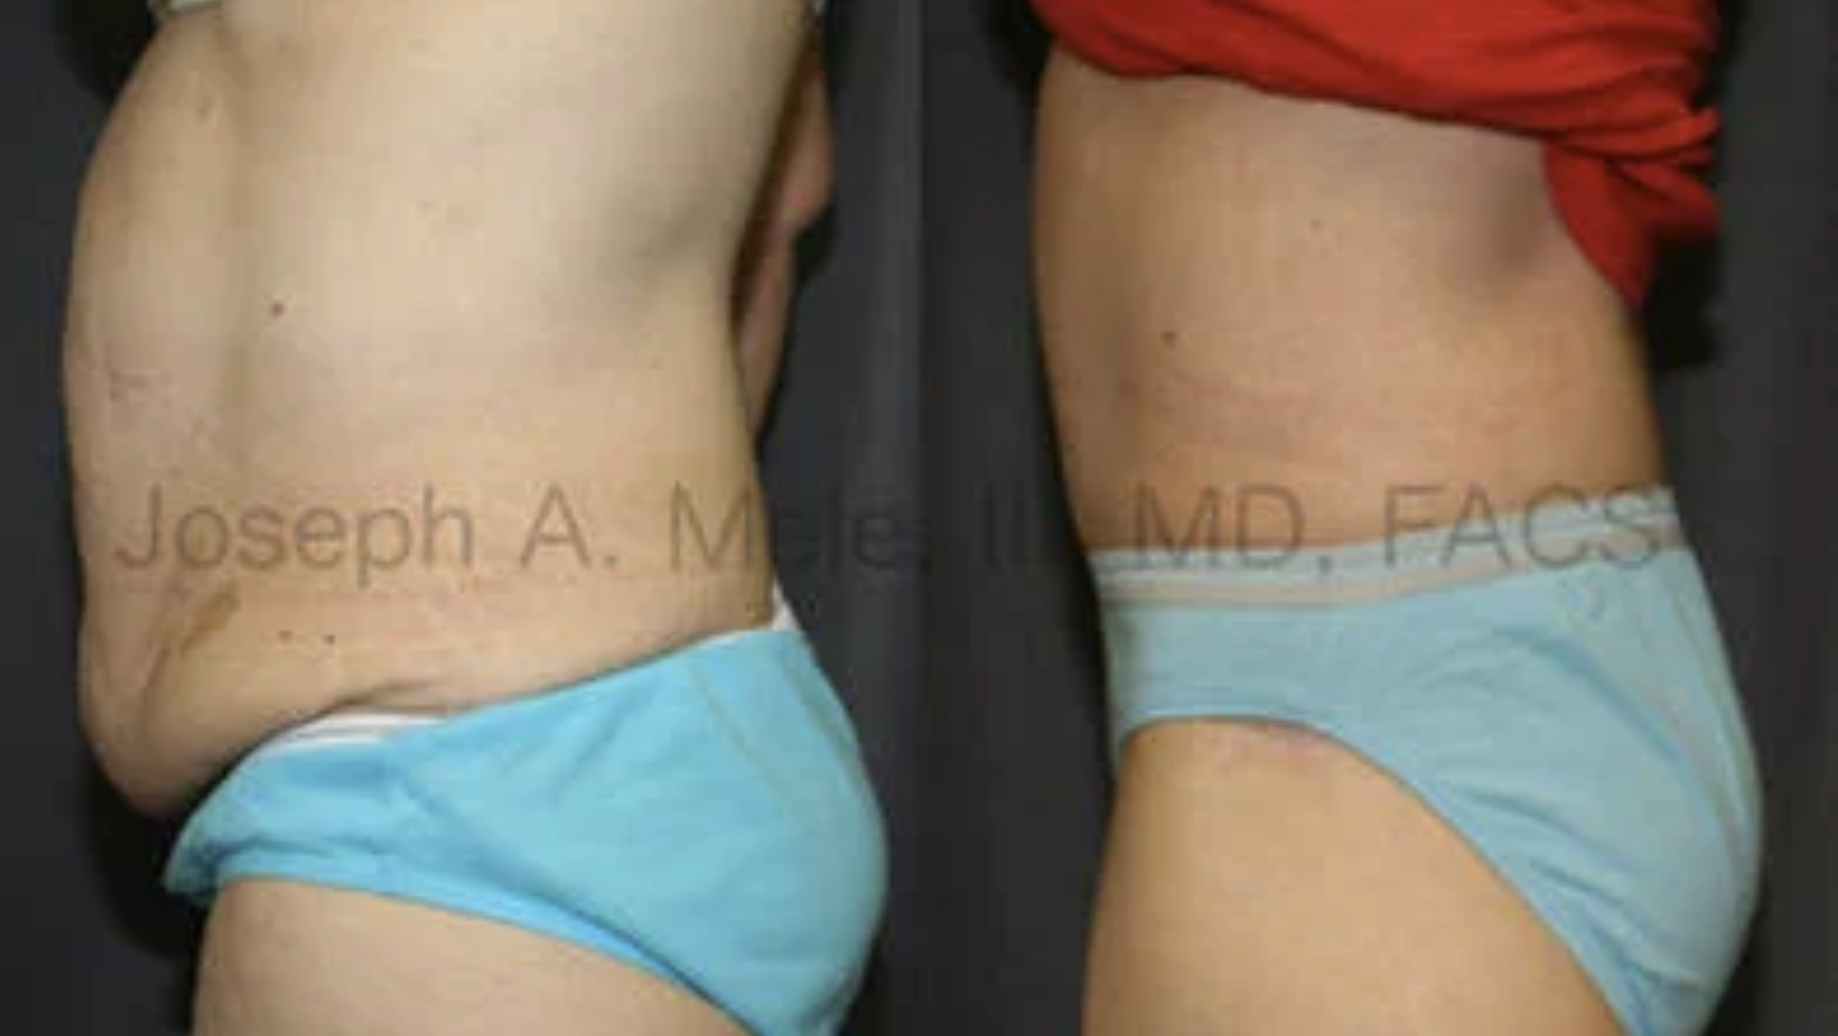 Tummy Tuck before and after Abdominoplasty to tighten the abdominal wall.